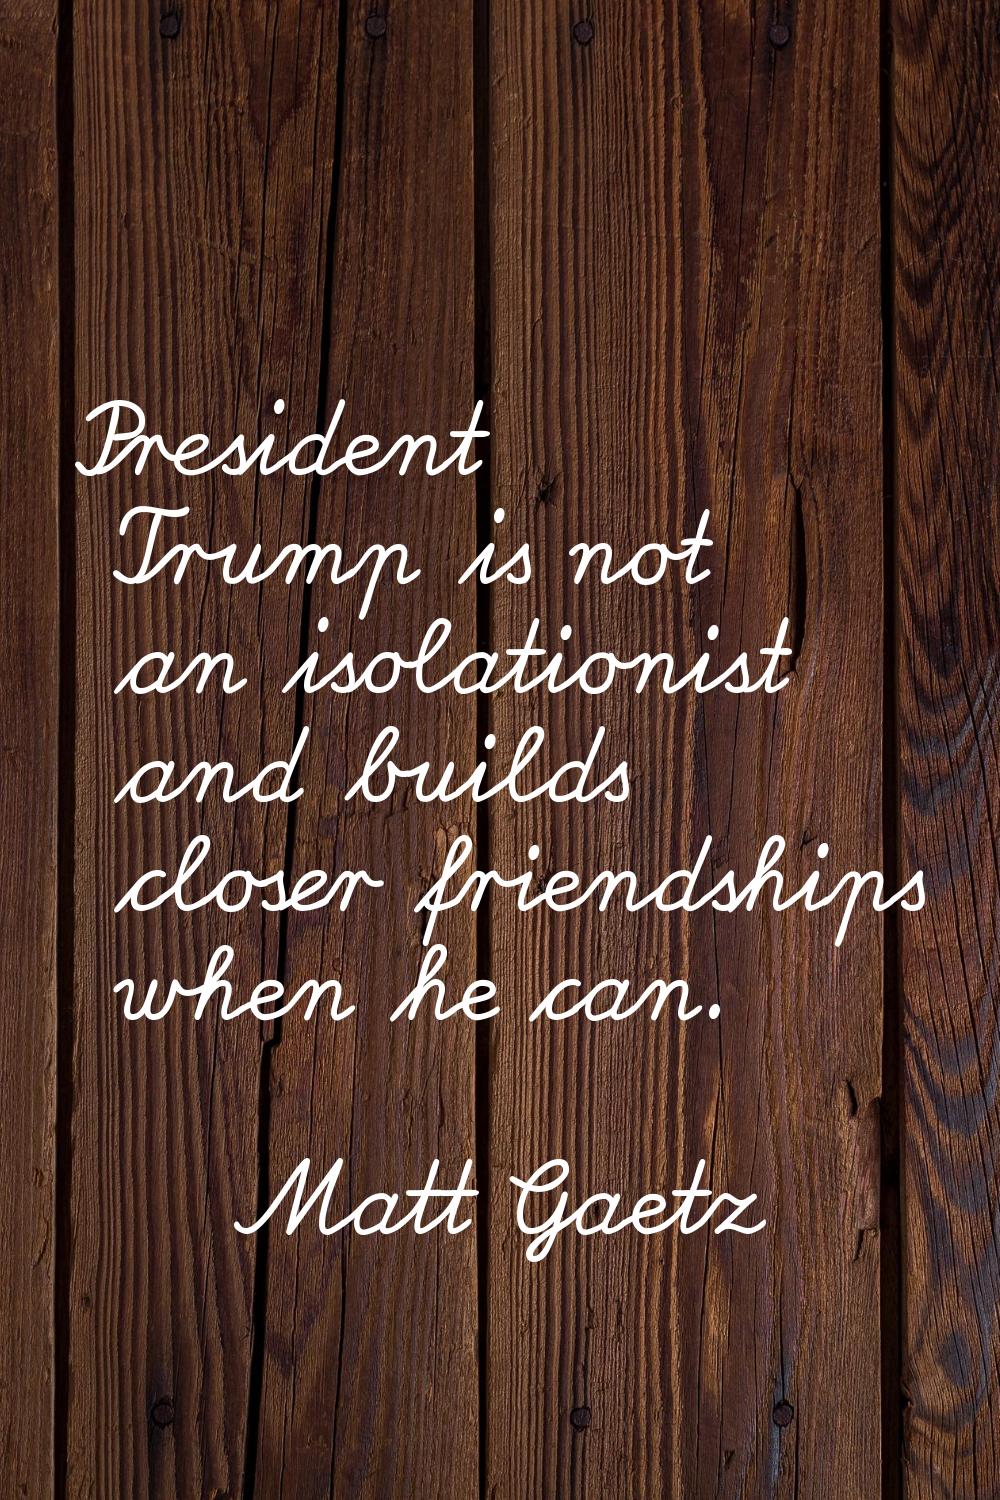 President Trump is not an isolationist and builds closer friendships when he can.